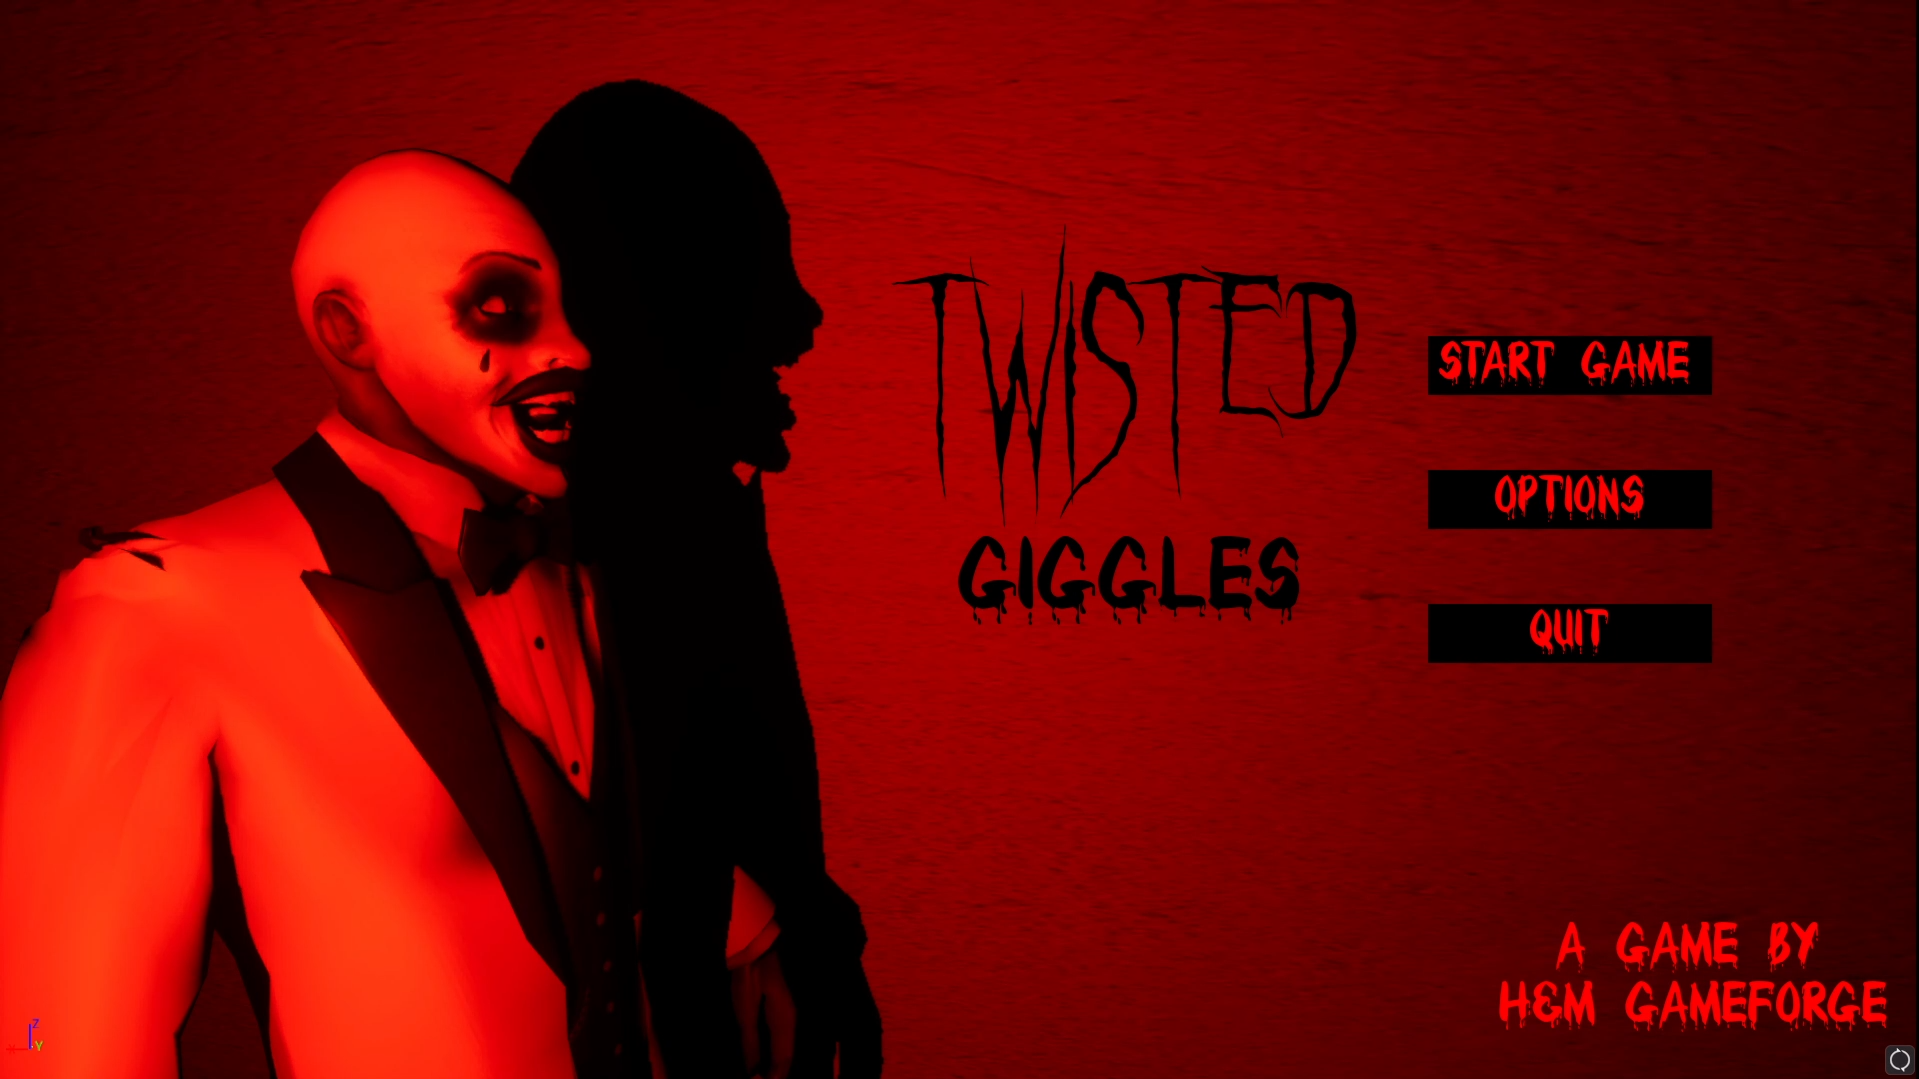 Twisted Giggles